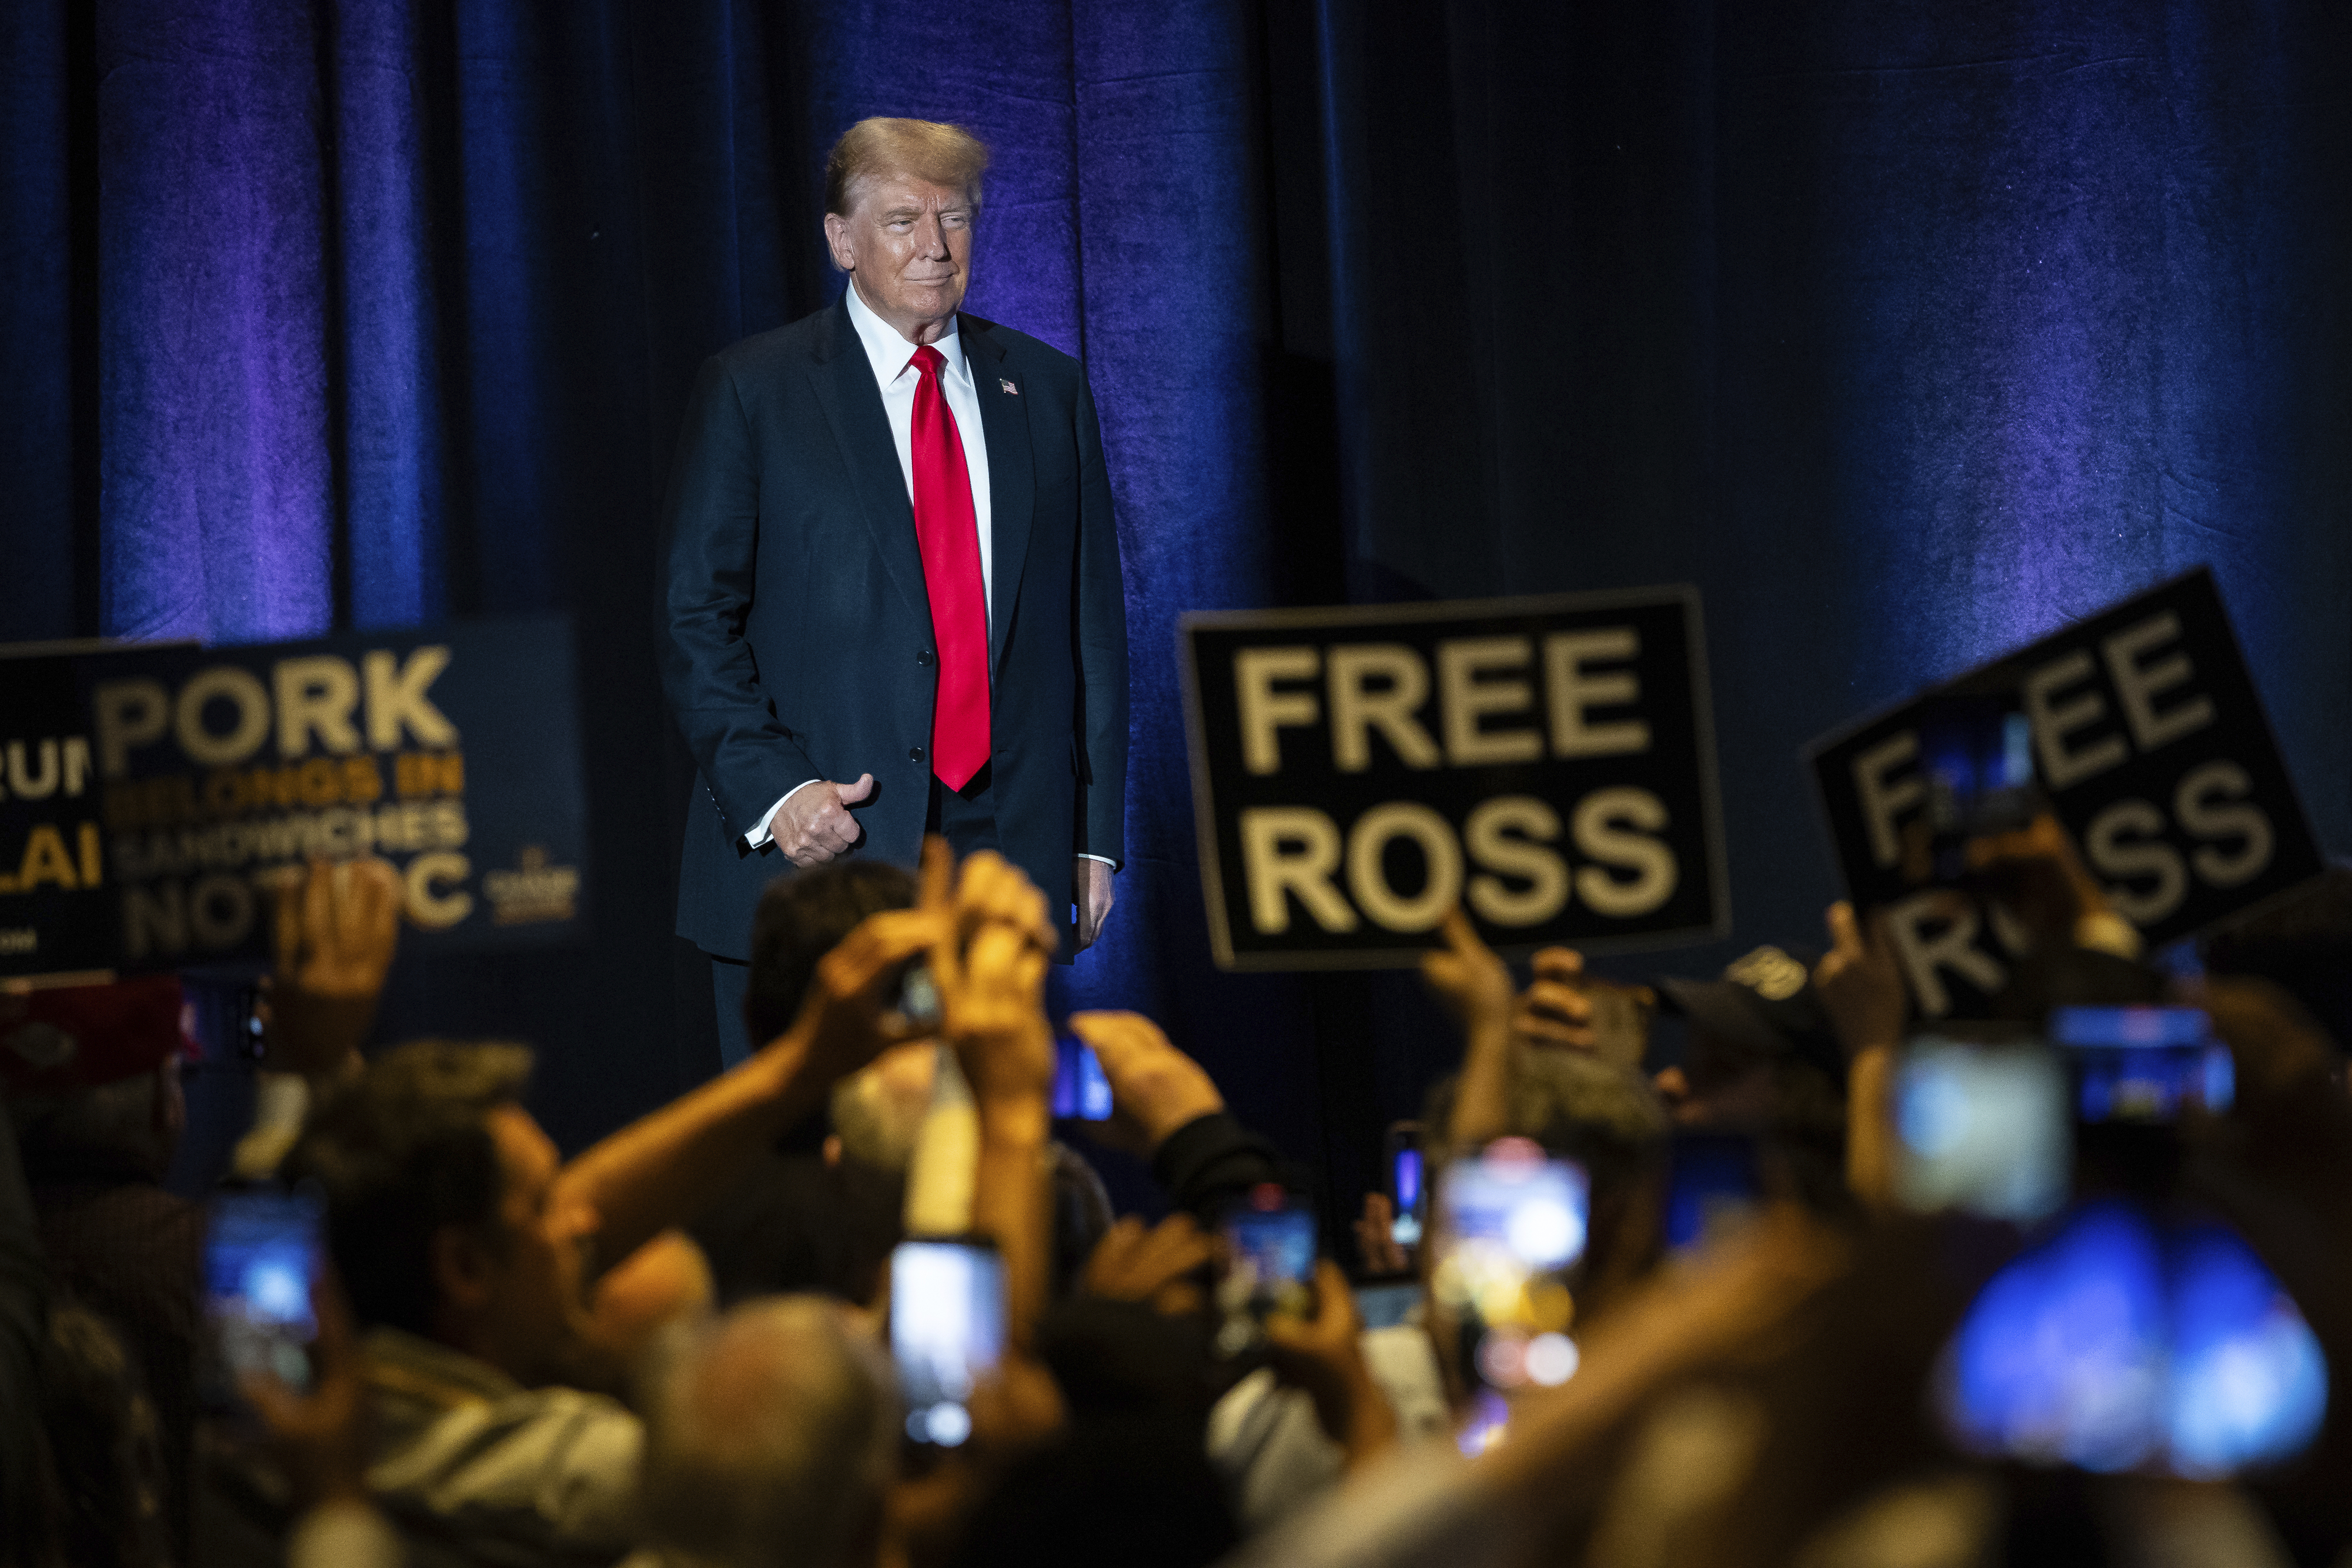 Donald Trump walks on stage as crowd holds signs reading FREE ROSS.